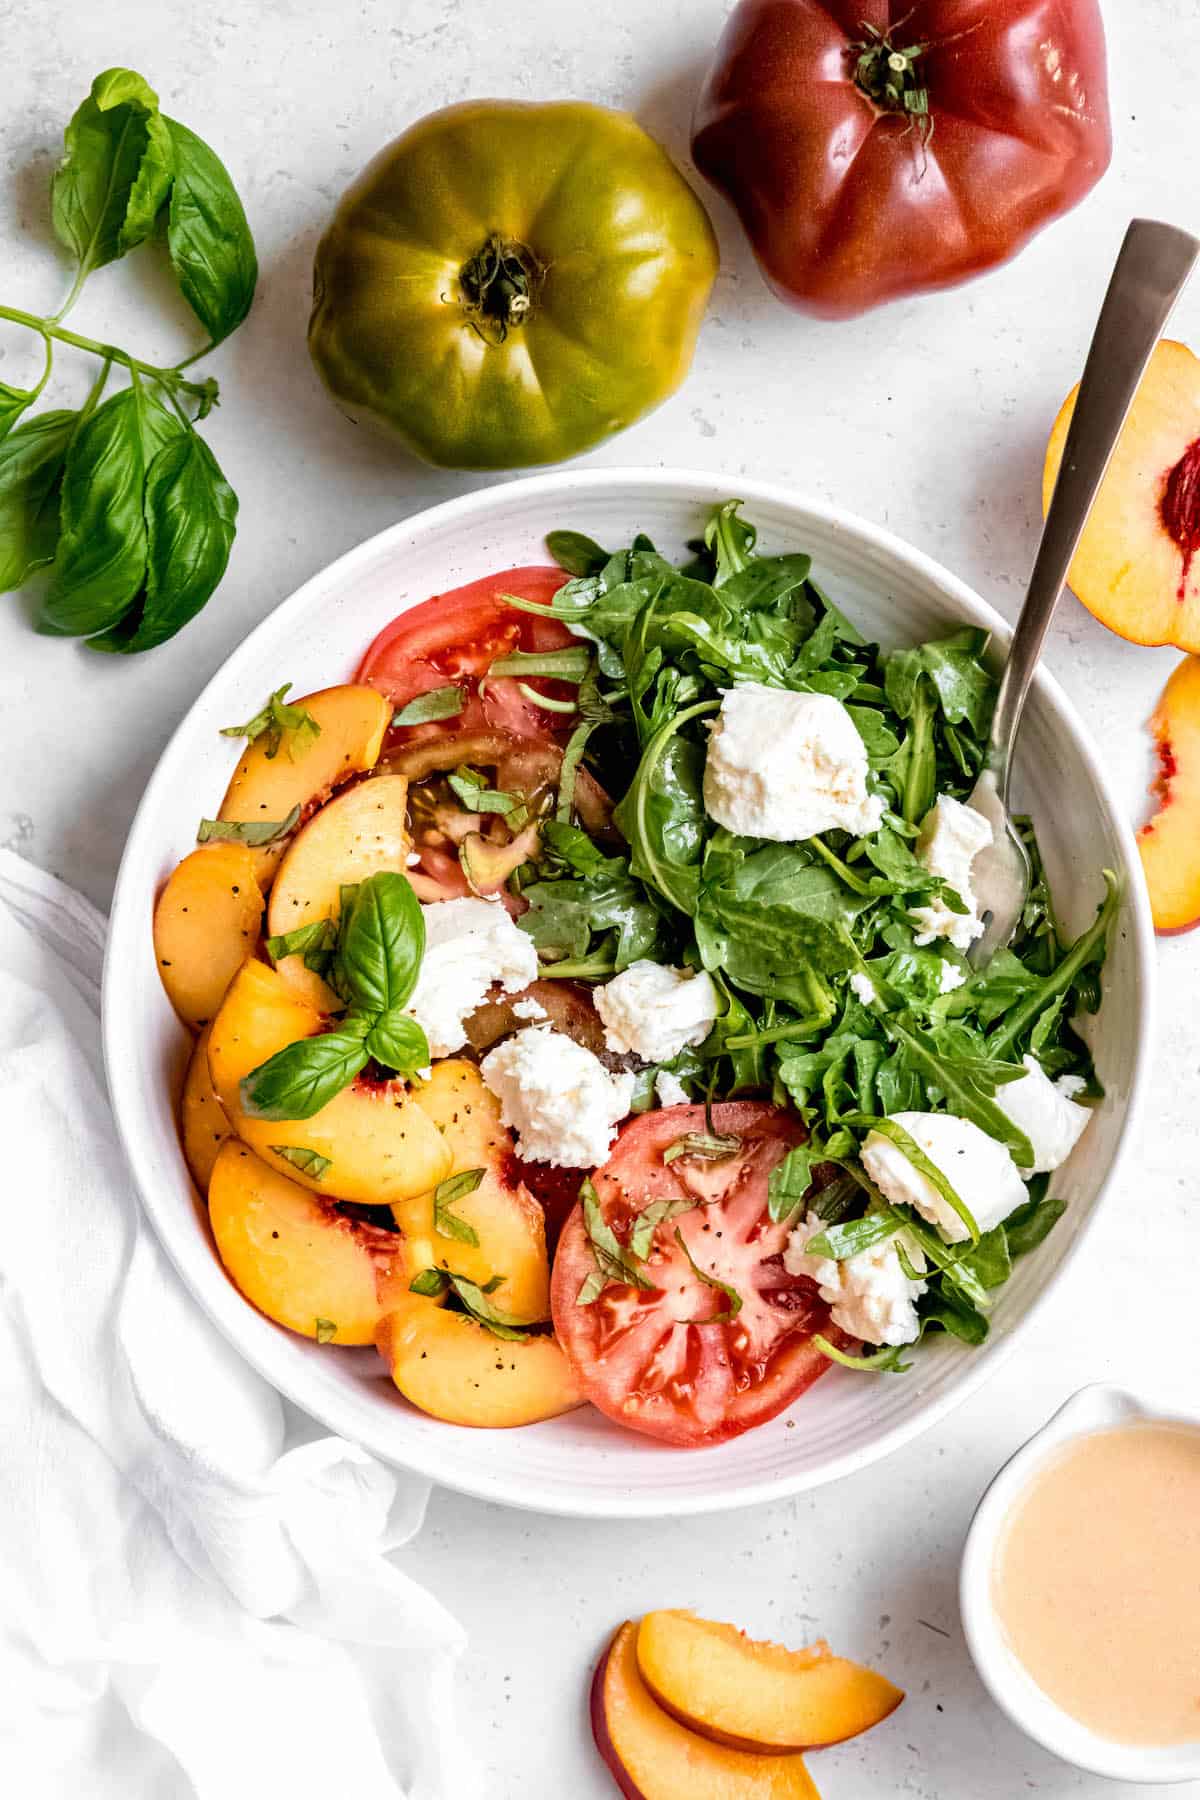 peach burrata salad as a fun twist on tomato caprese salad with arugula and white balsamic vinaigrette in a round white bowl with a silver fork, and fresh tomatoes, basil, and peaches scattered around.